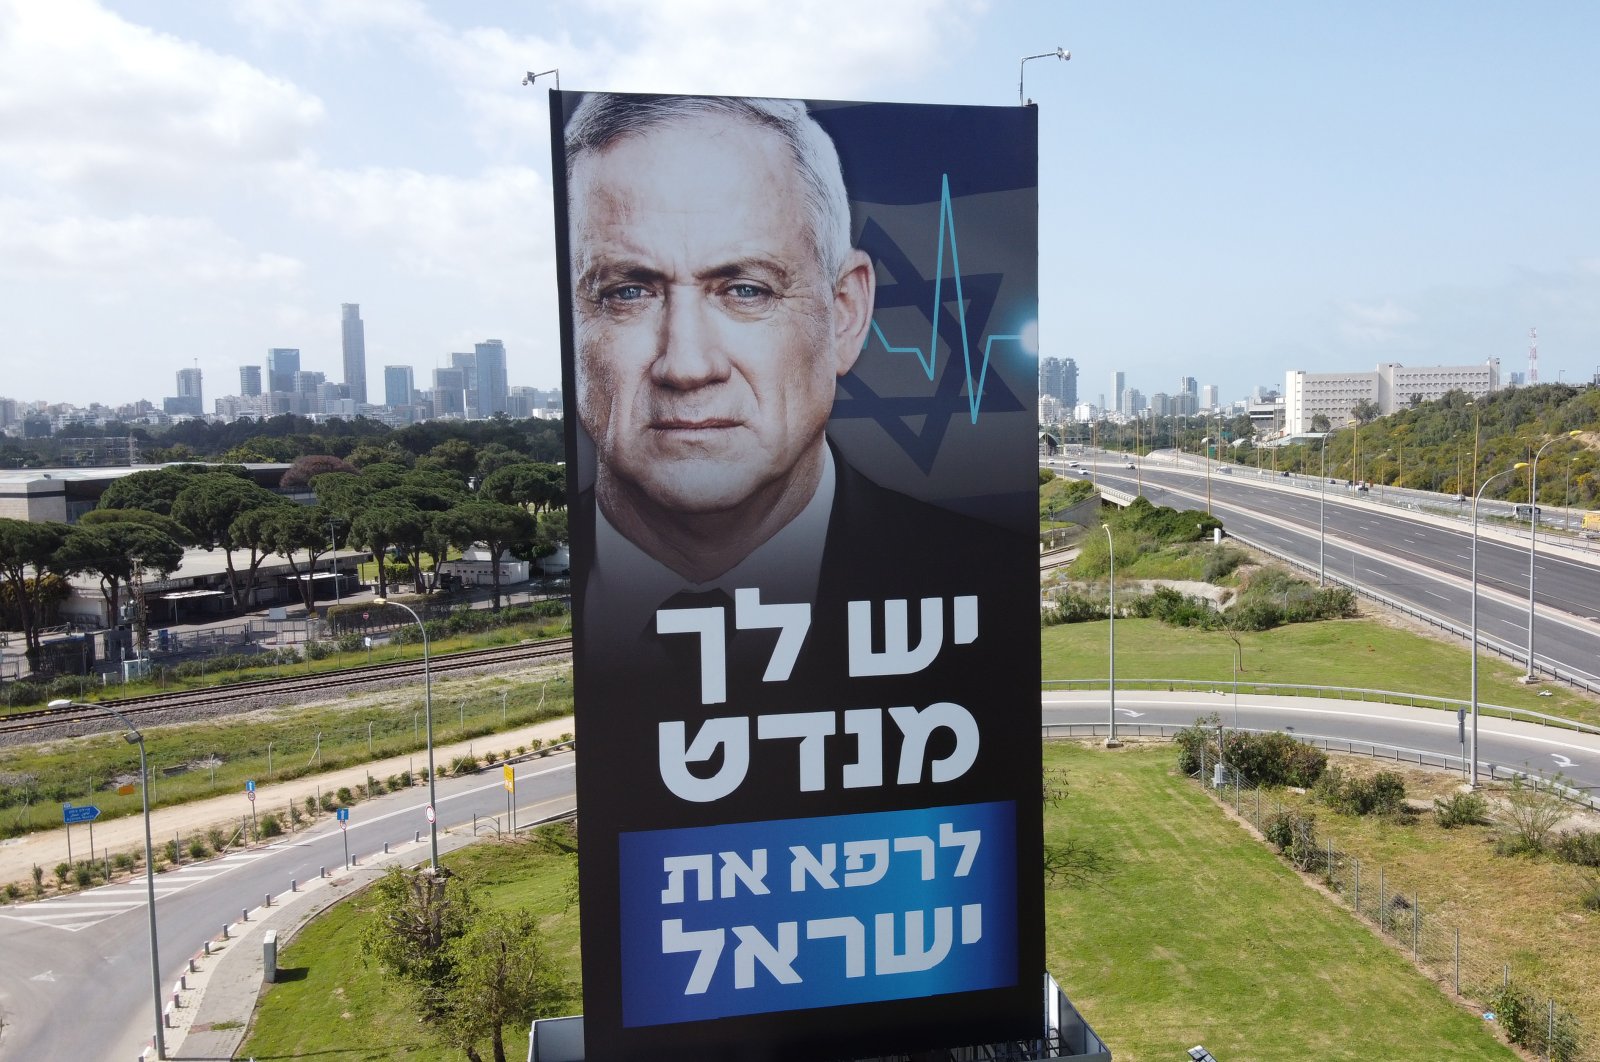 A billboard shows Israeli parliament speaker Benny Gantz on a mostly empty freeway because of the coronavirus in Tel Aviv, Israel, Sunday, March 29, 2020. The Hebrew writing says you have a mandate to heal Israel. (AP Photo)